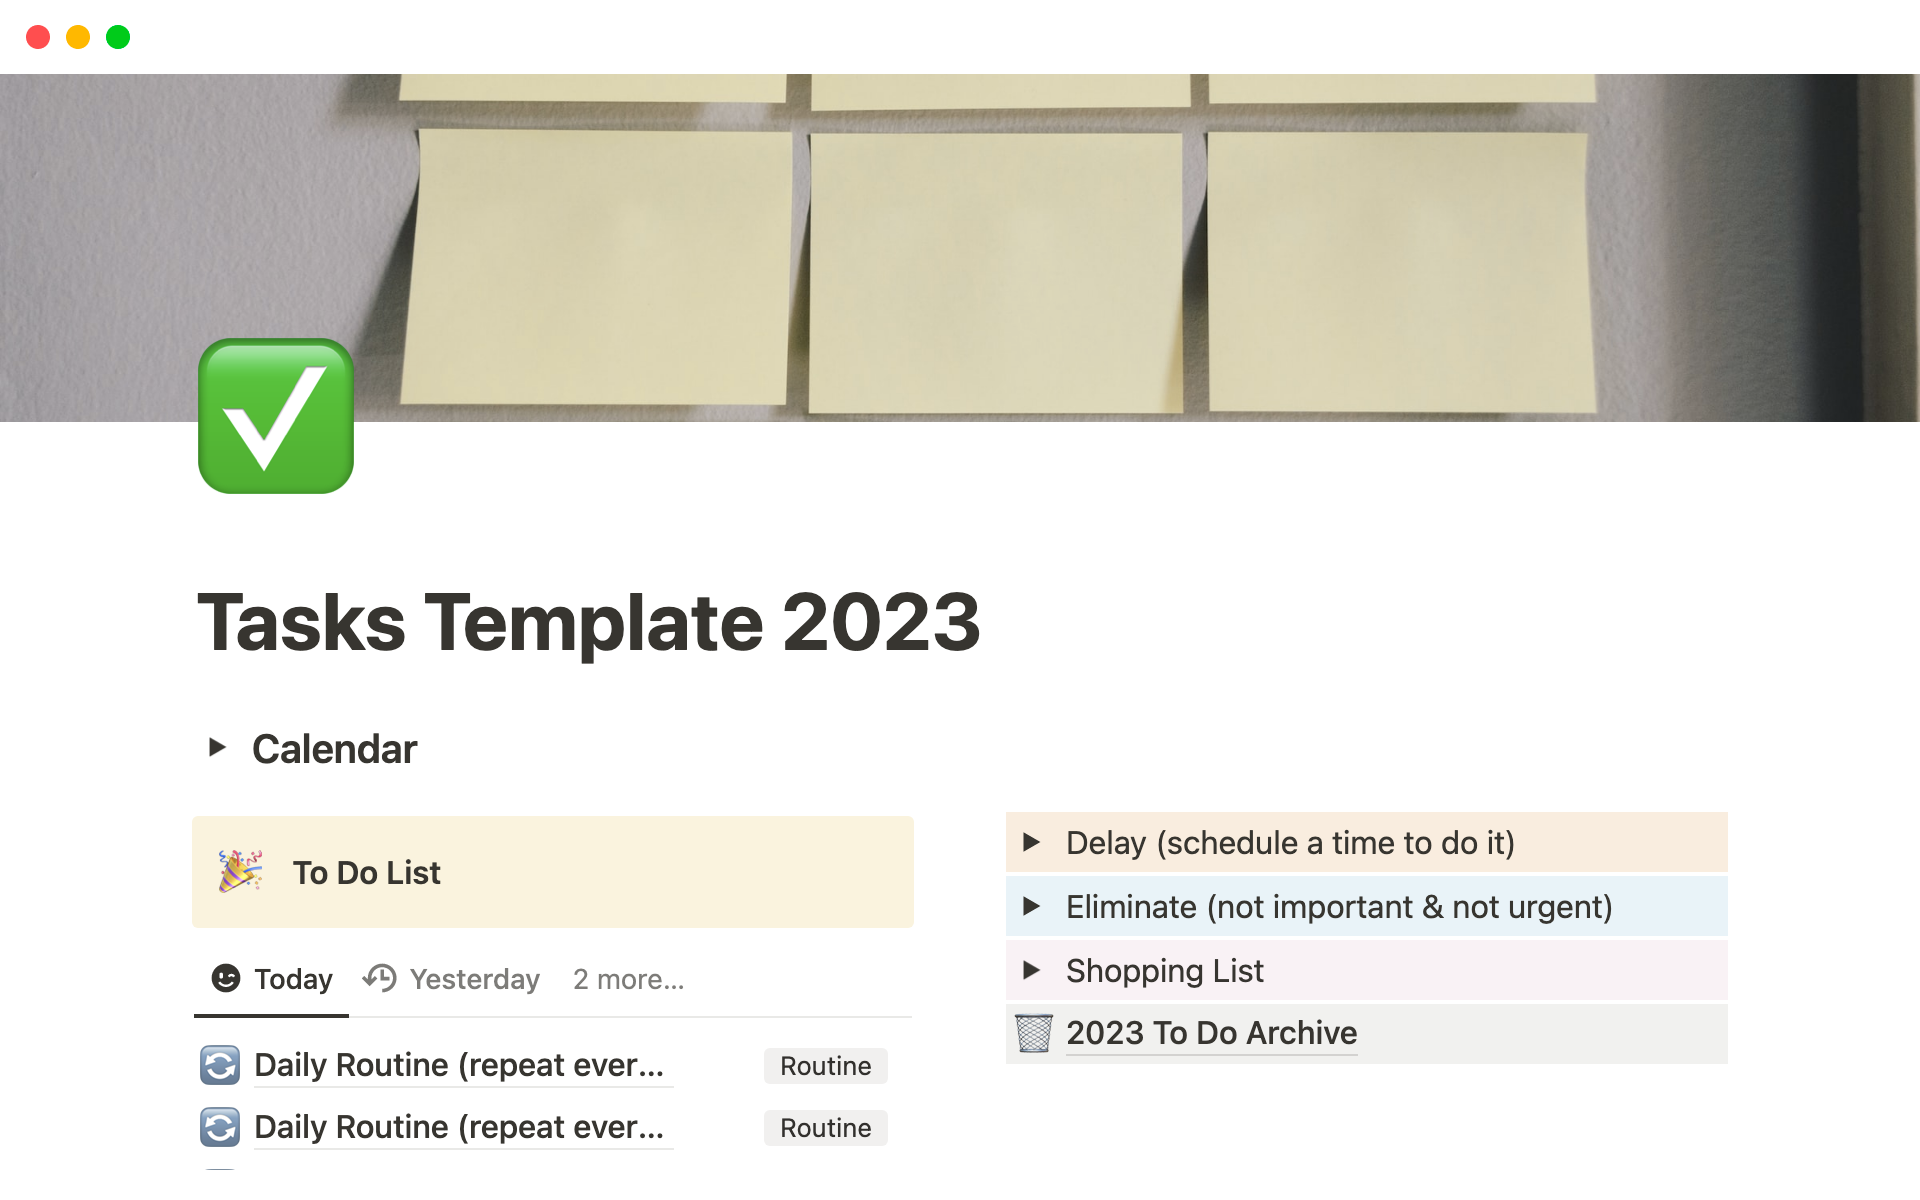 A template preview for Tasks Template 2023